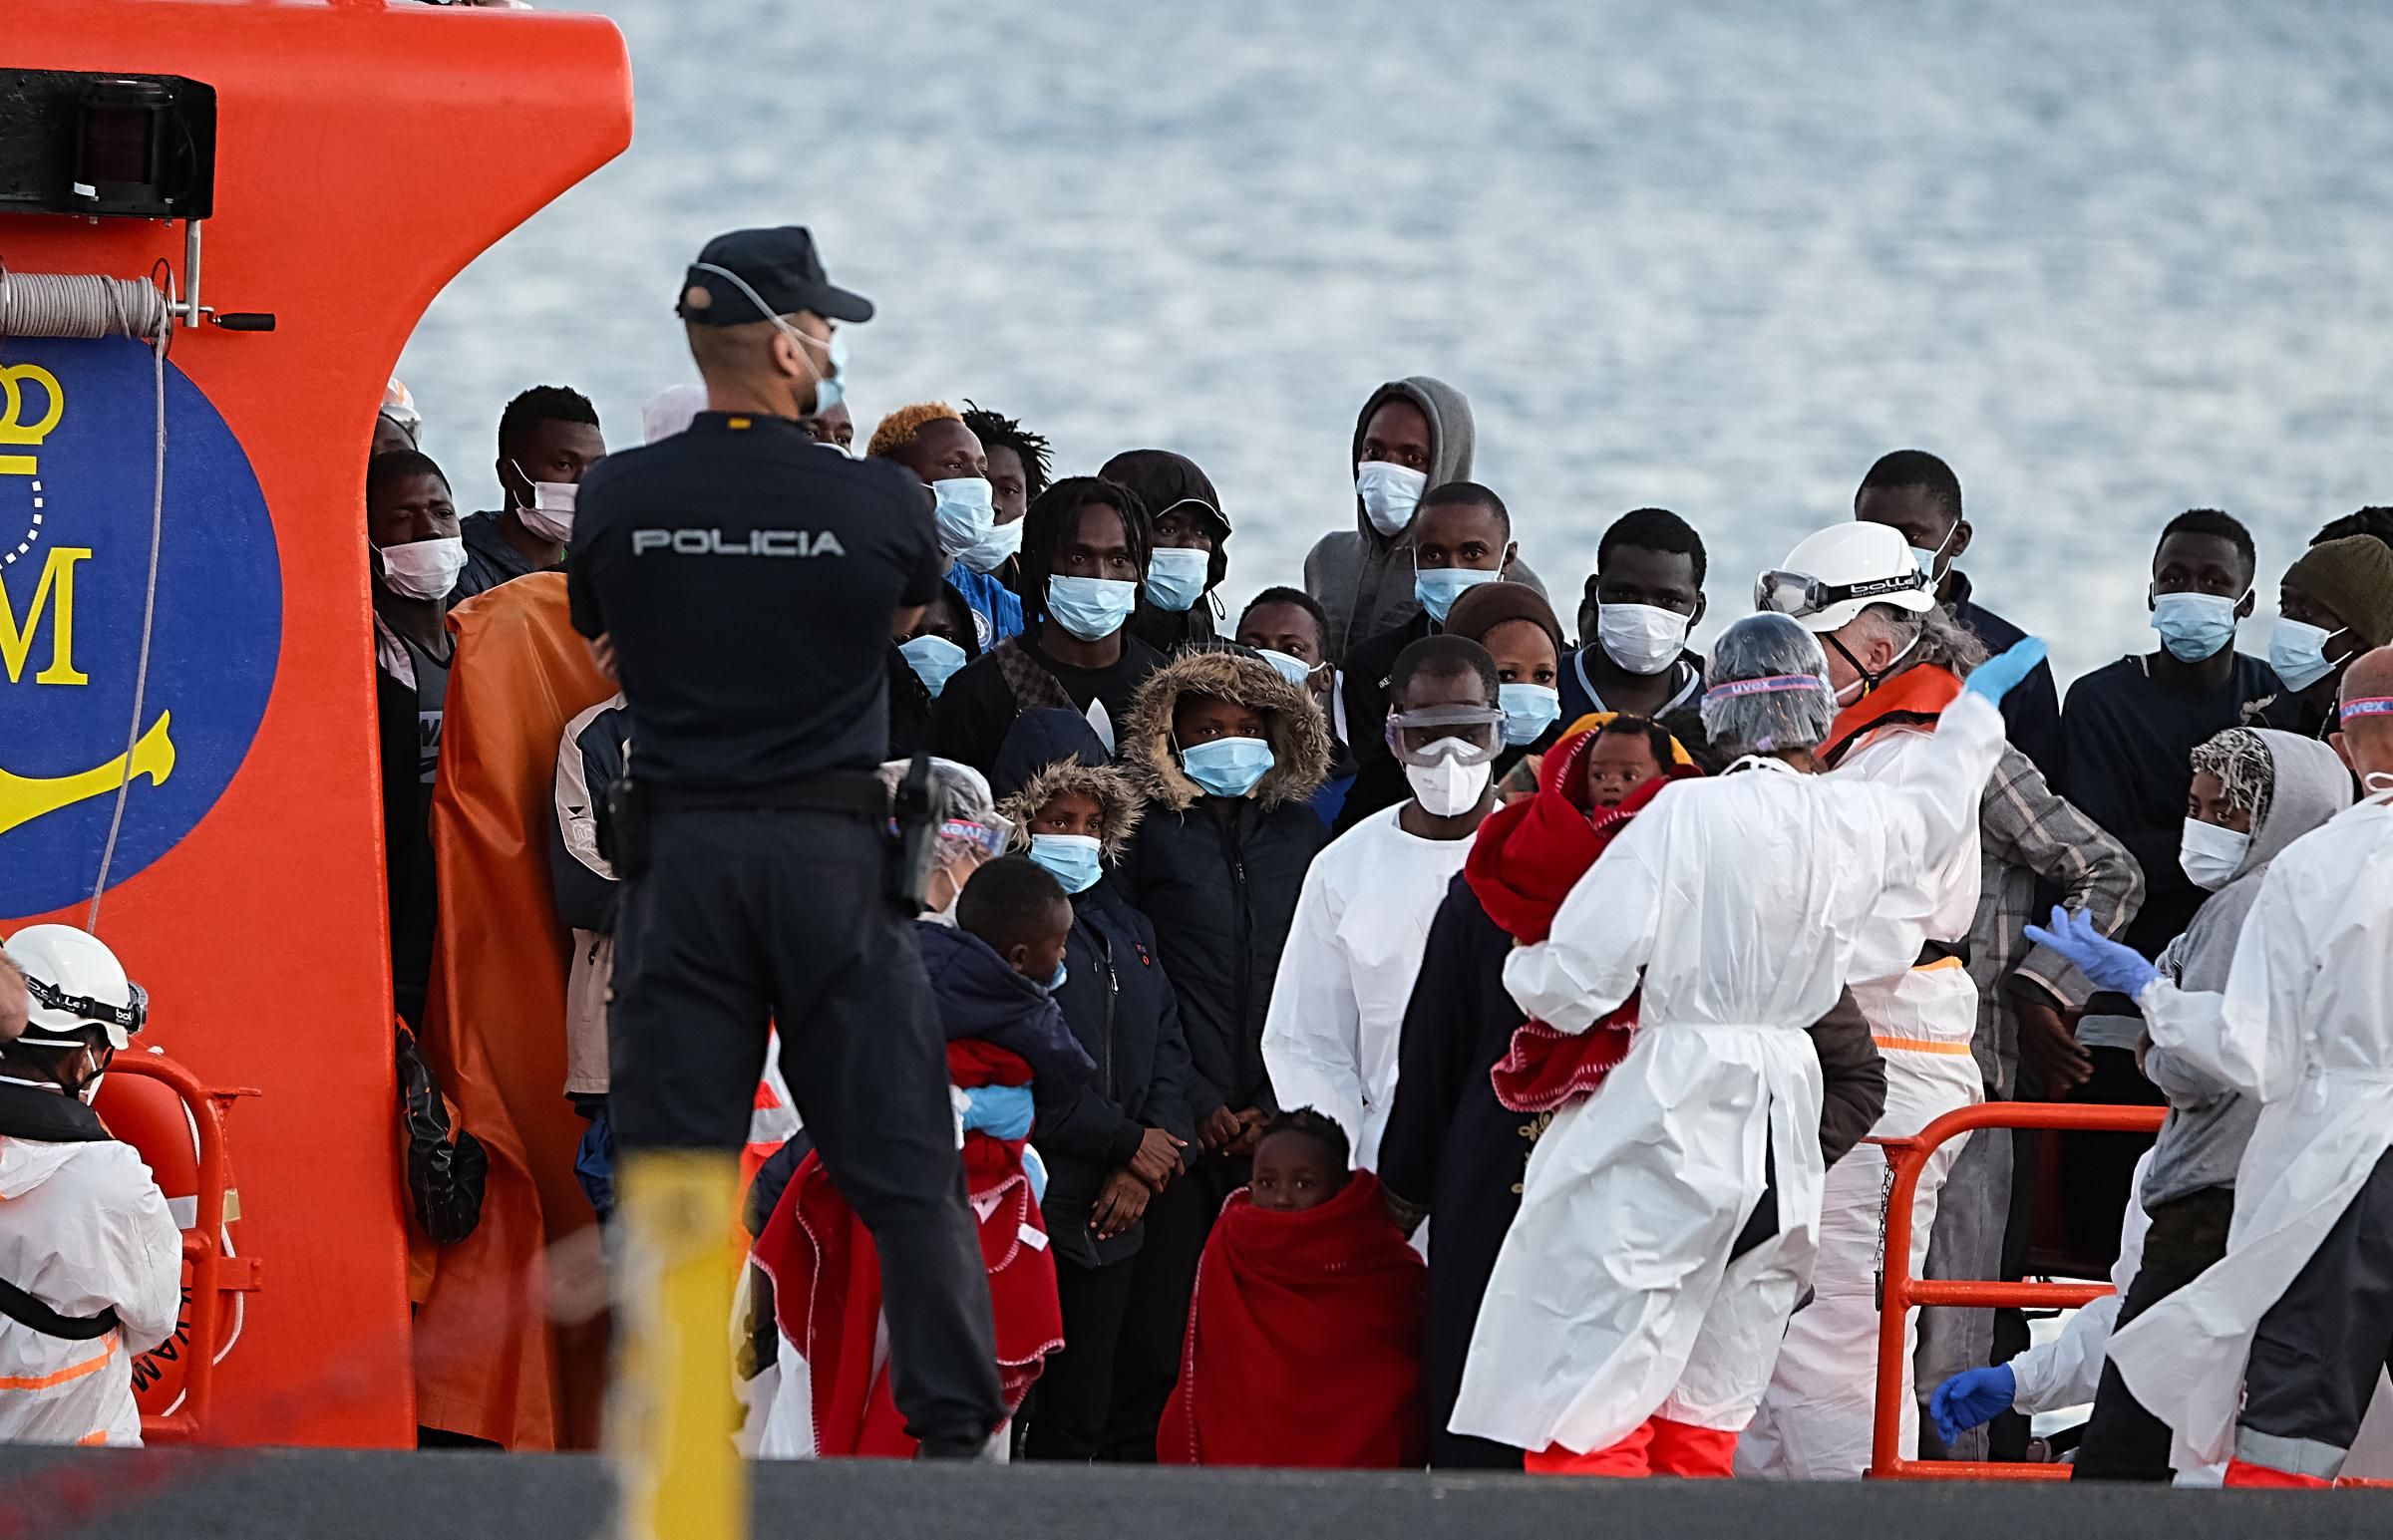 Refugees come ashore in the Canary Islands